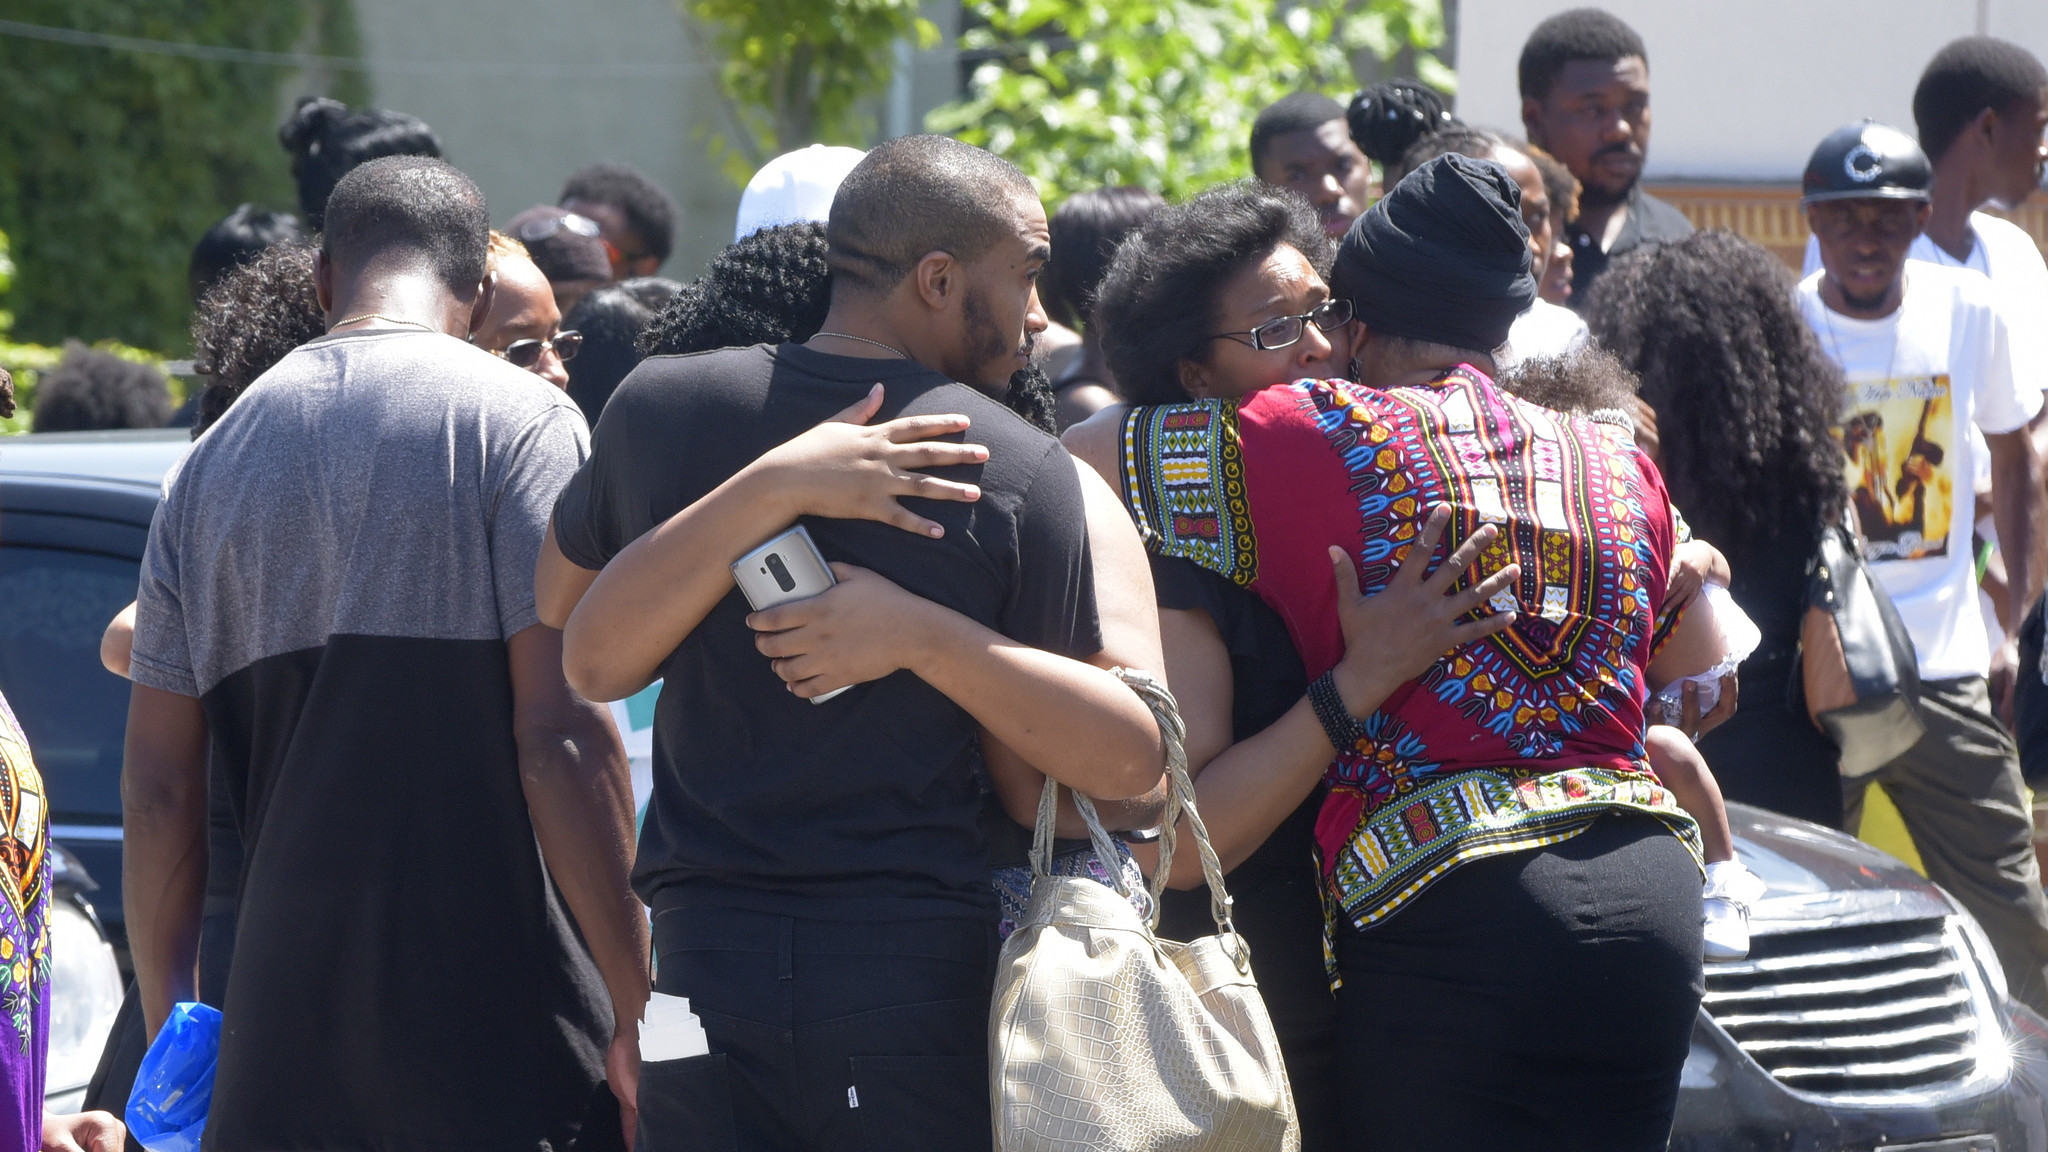 Mourners, including young son, attend funeral for Korryn Gaines - Baltimore Sun2048 x 1152